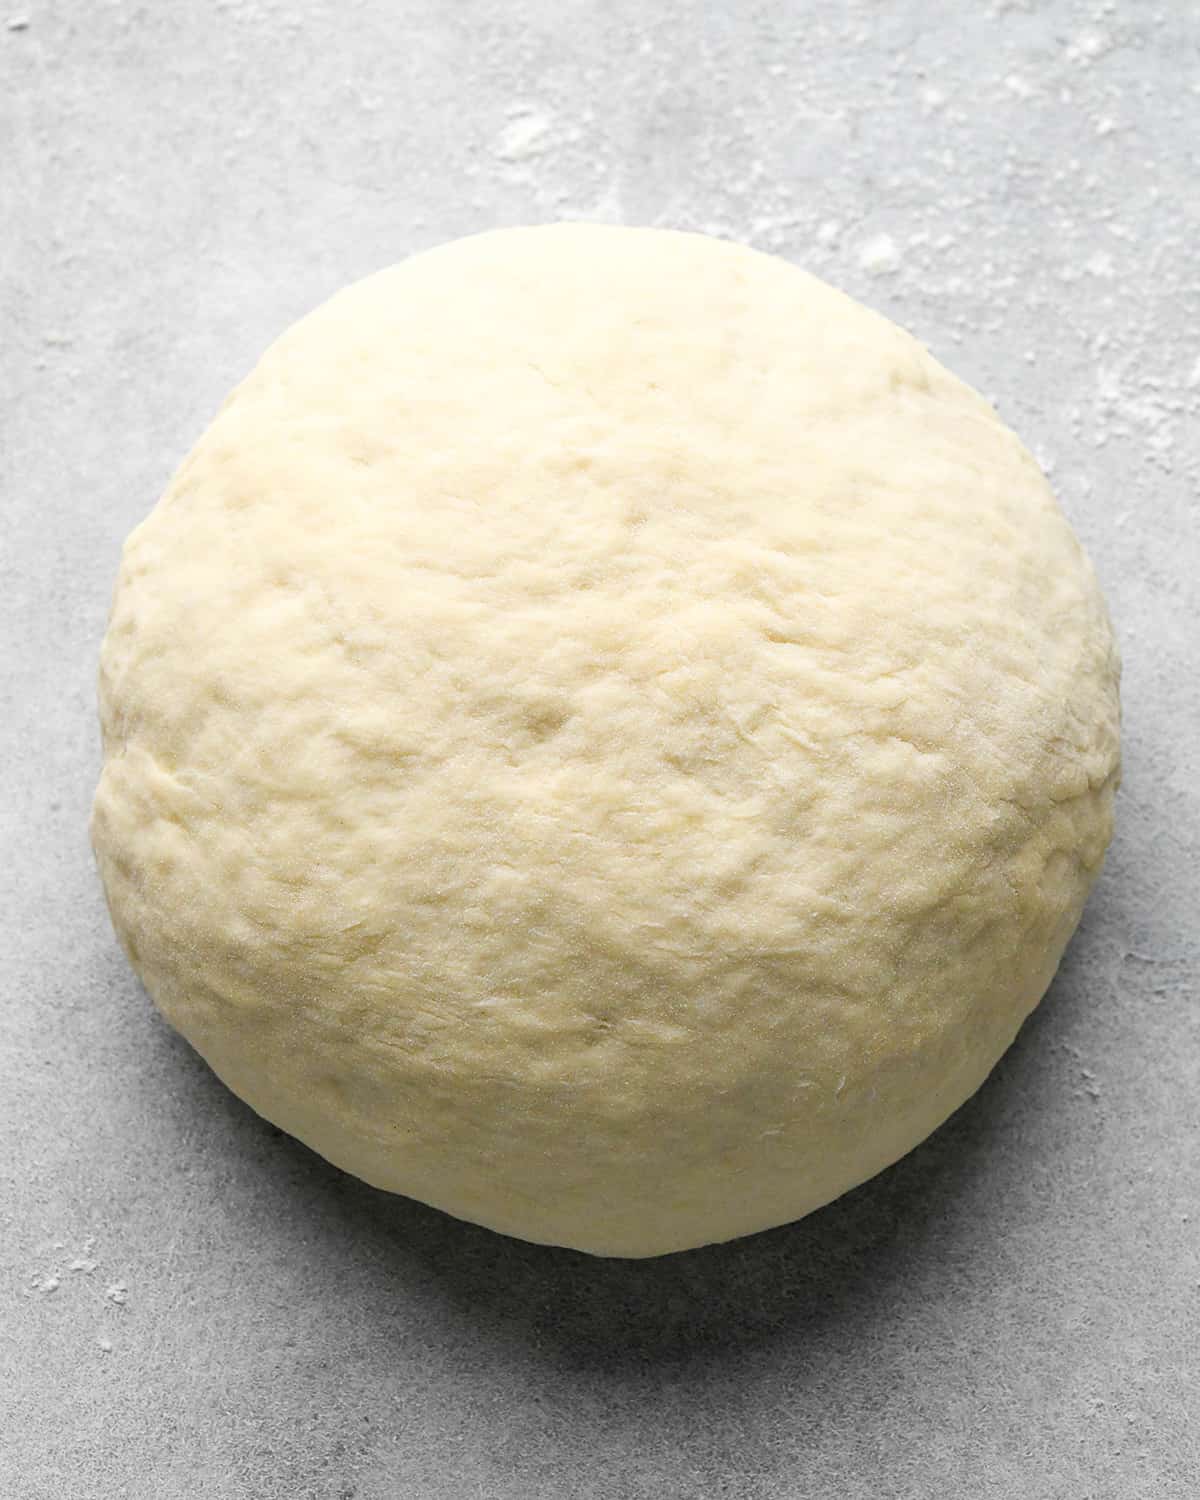 How to Make Pizza dough formed into a ball